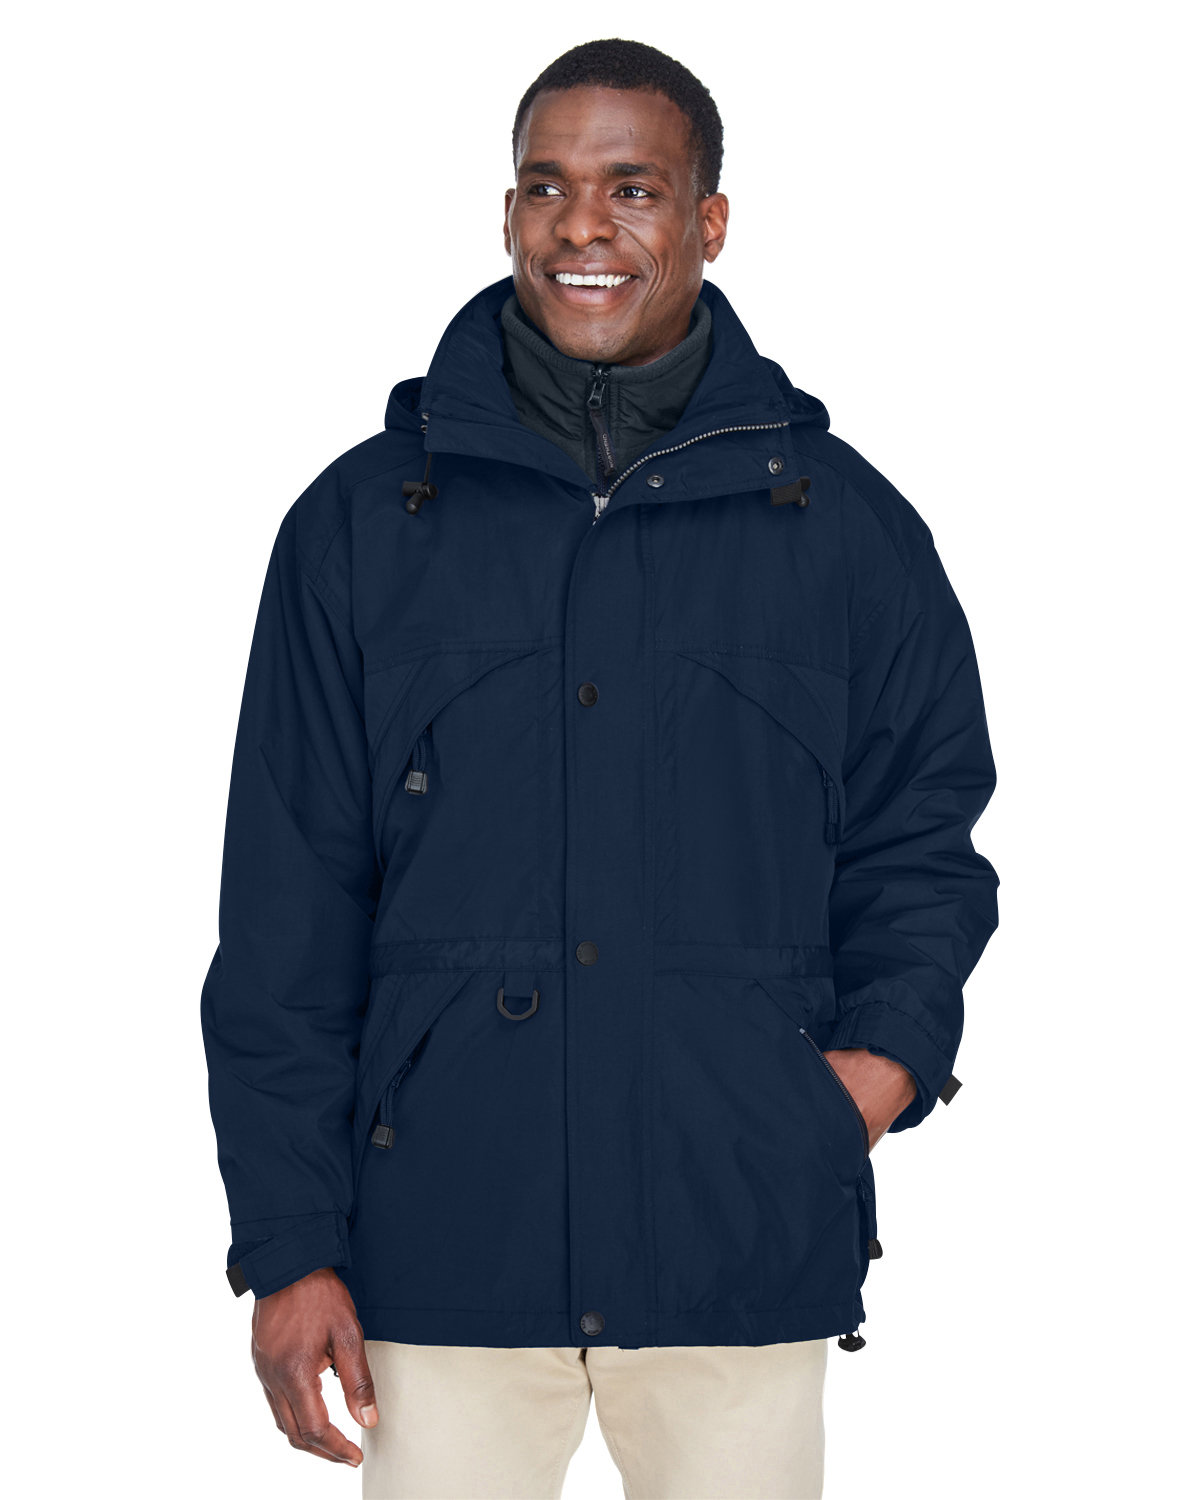 North End 88007 - Men's 3-in-1 Parka with Dobby Trim